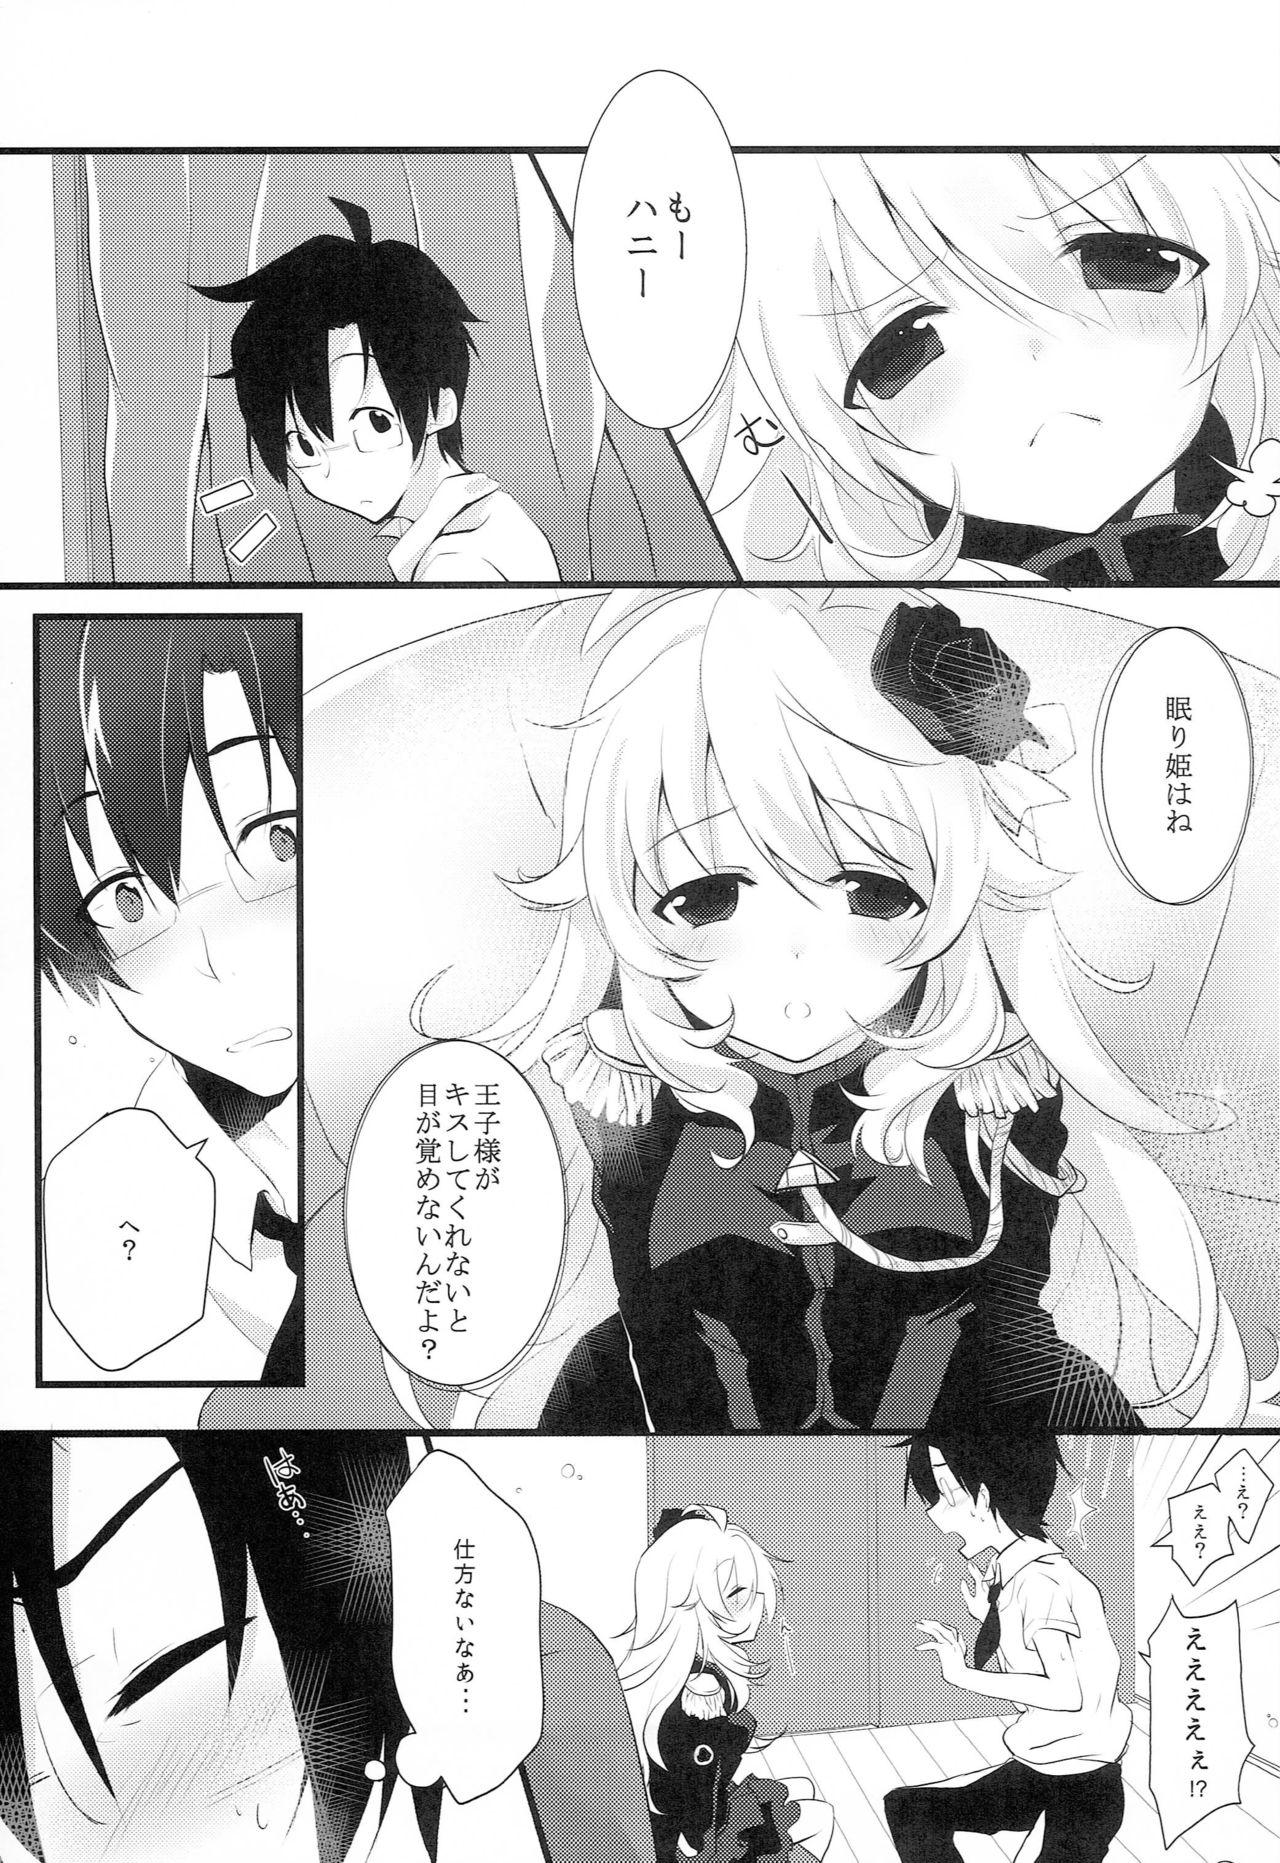 American WAKE ME UP WITH A KISS - The idolmaster Chibola - Page 8